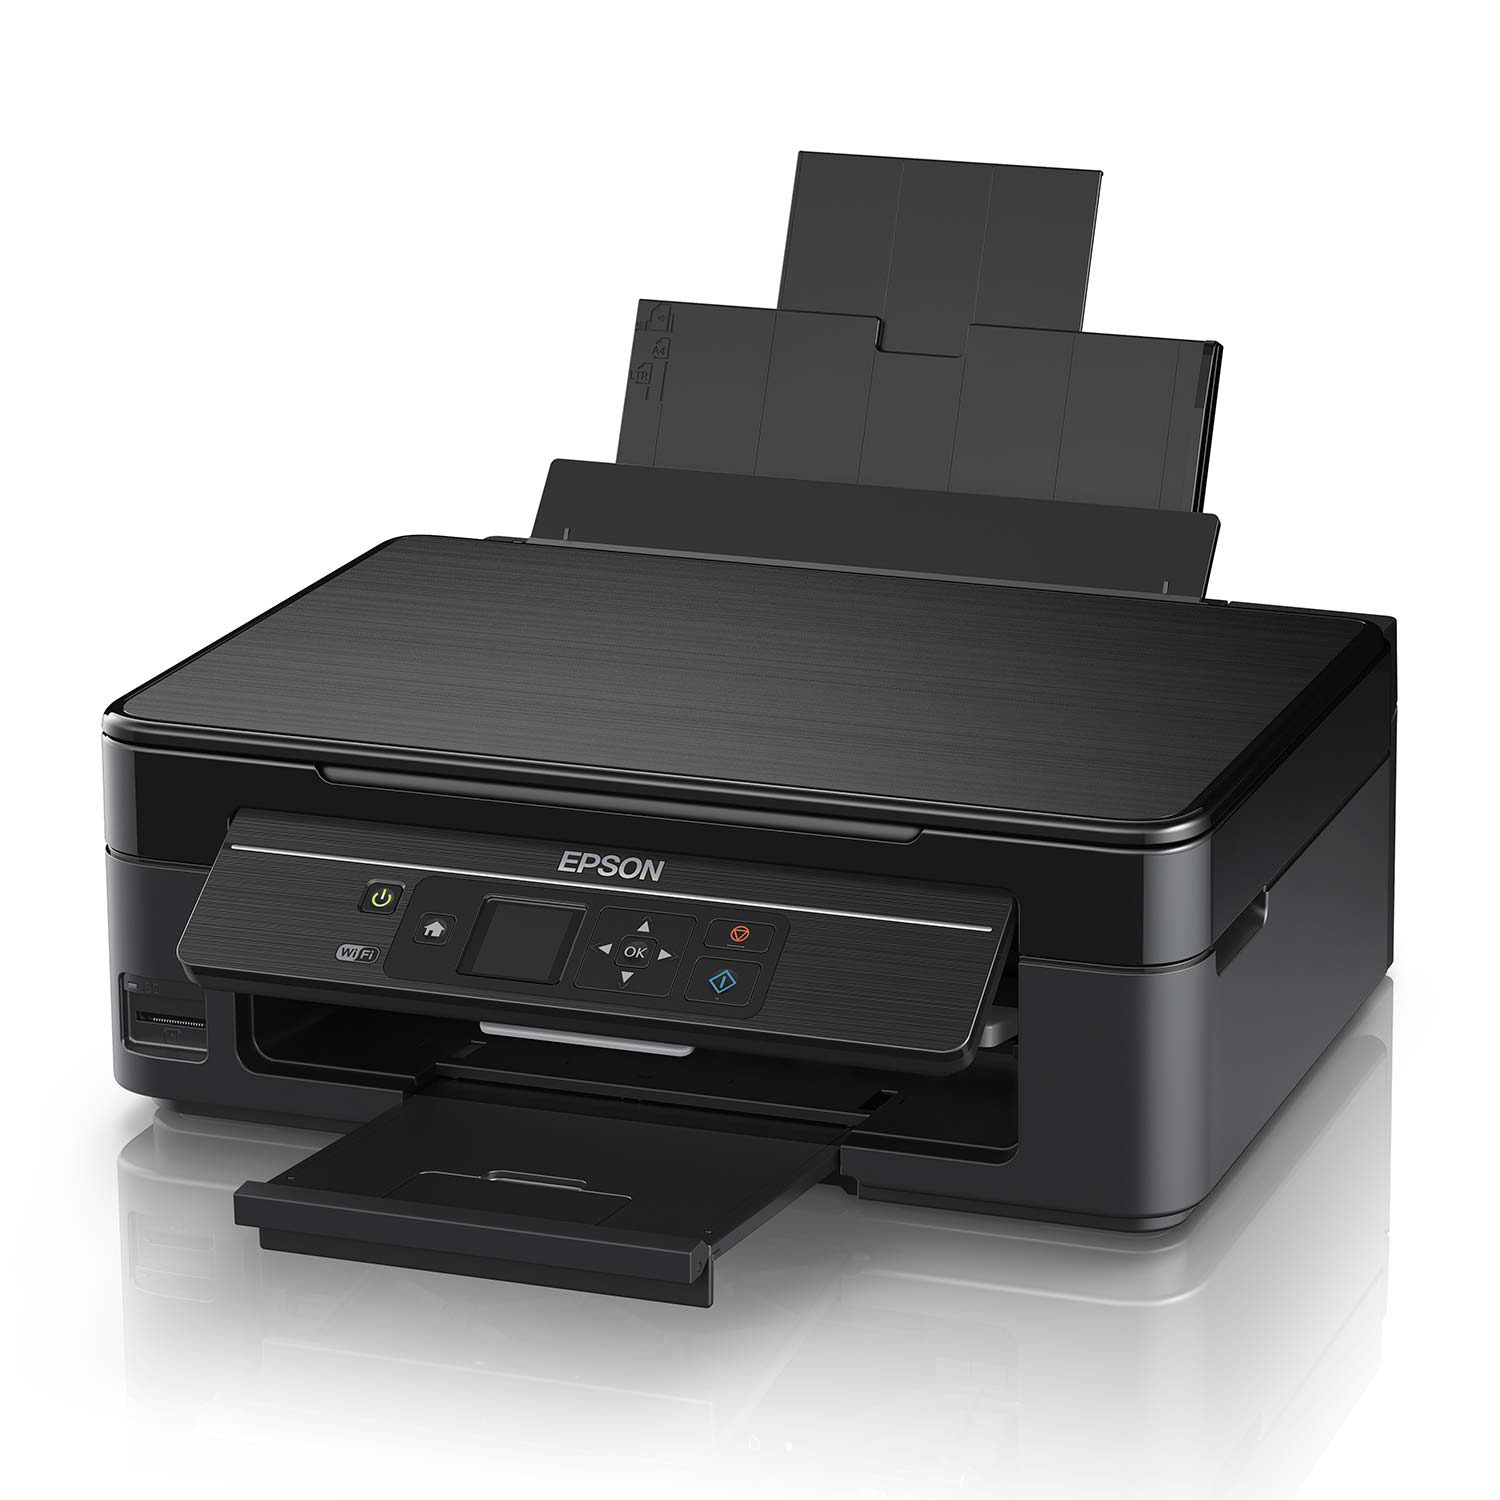 Image of Epson All-in-One Printer XP-342